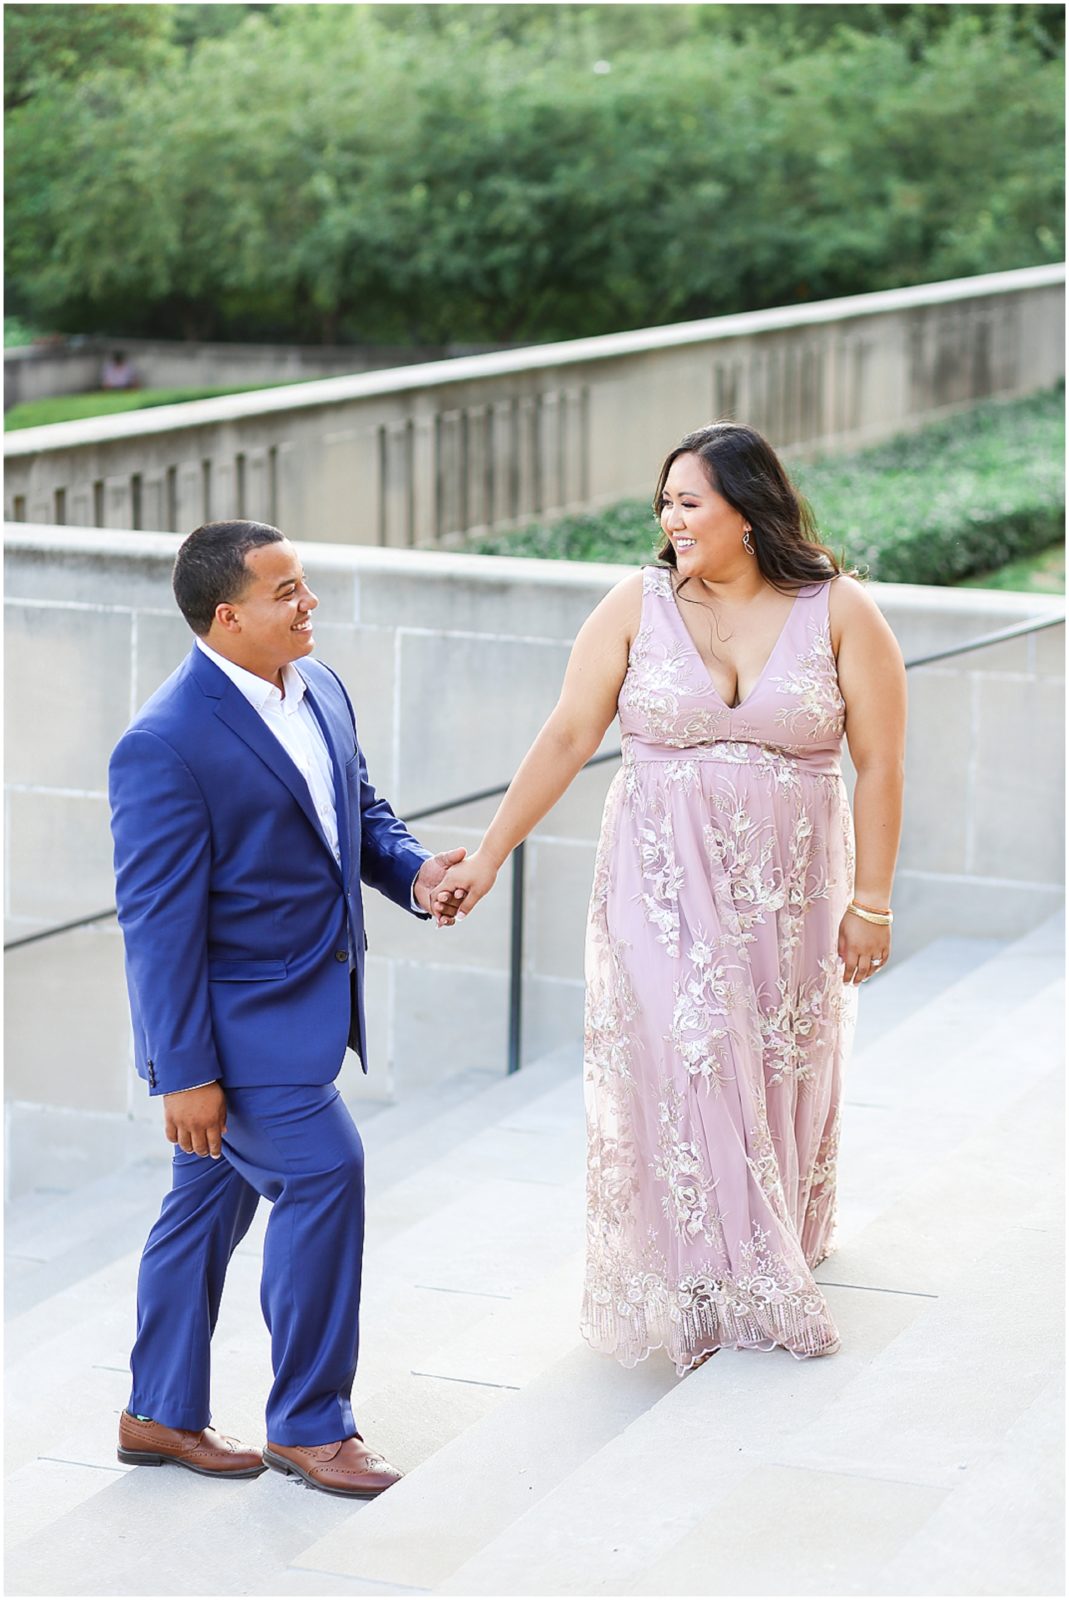 Christine & Spenser came from out of town to Kansas City for their beautiful engagement session which took place at the Nelson Atkins Museum and at Loose Park. They made the drive from Columbia Missouri to have an amazing engagement experience and we sure did have a good time! 